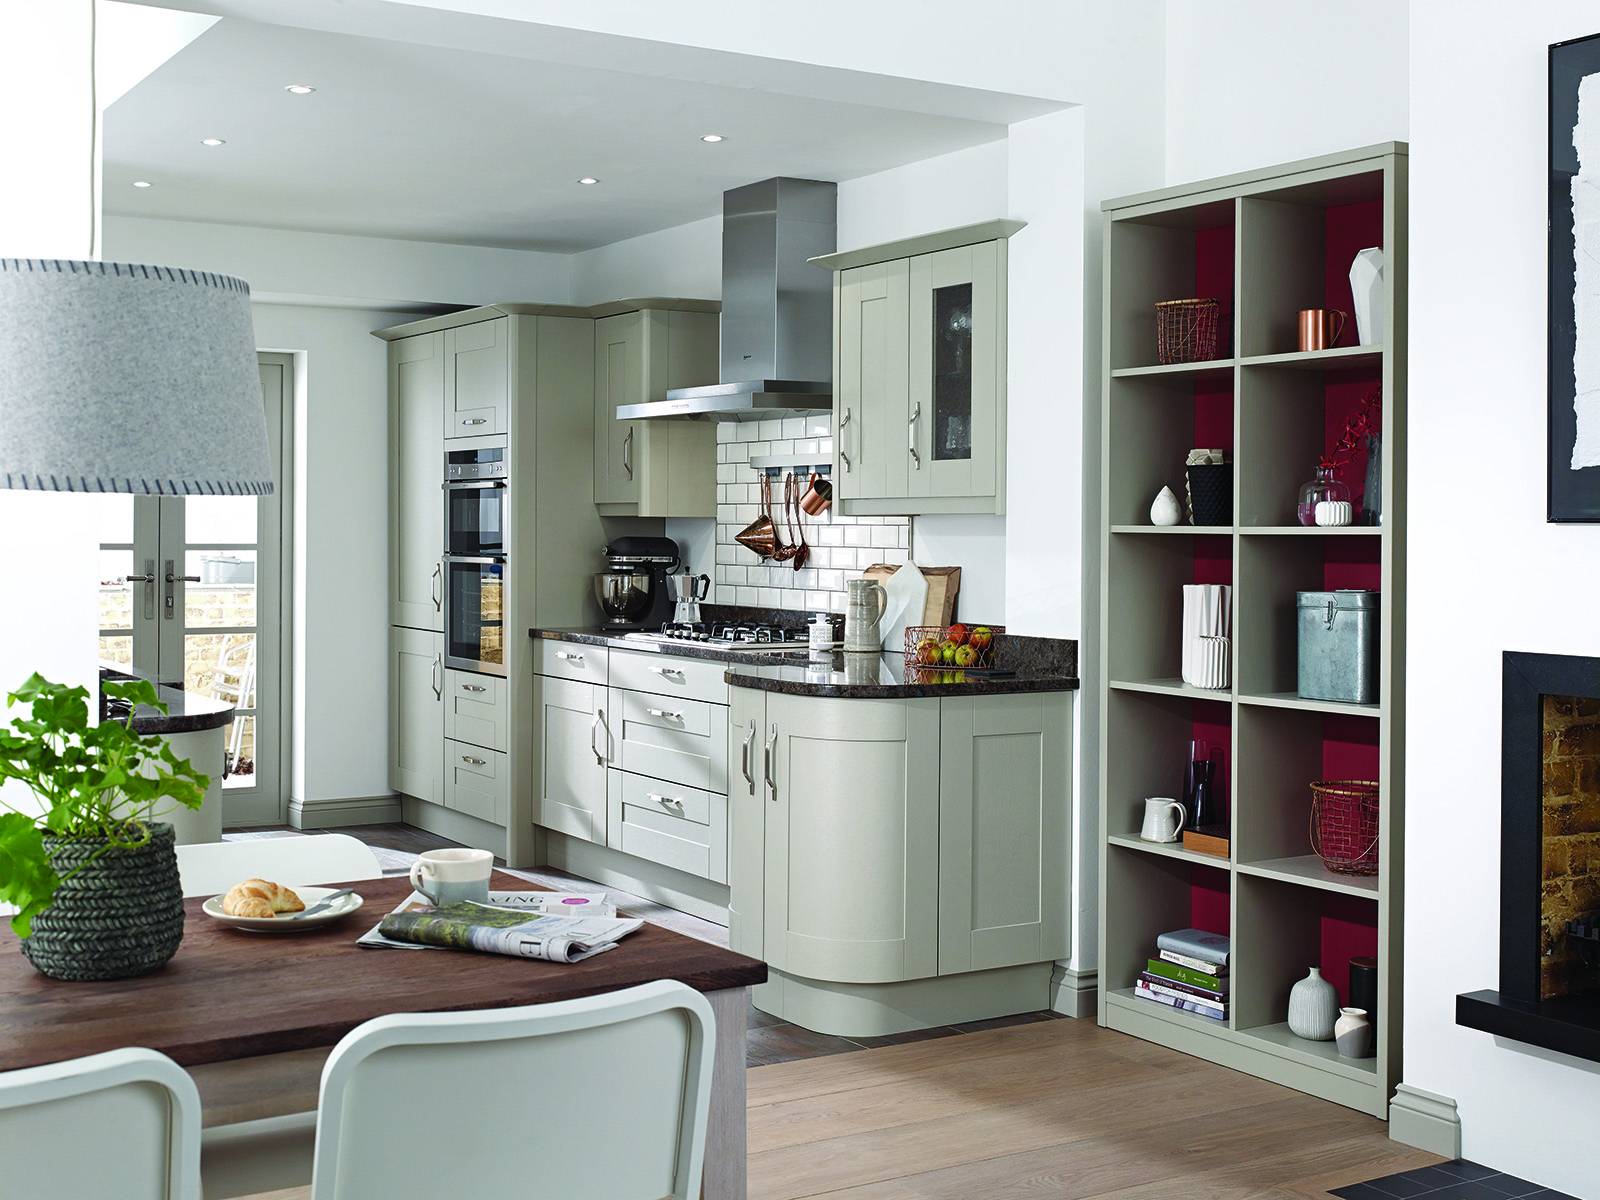 Small & Compact Kitchens